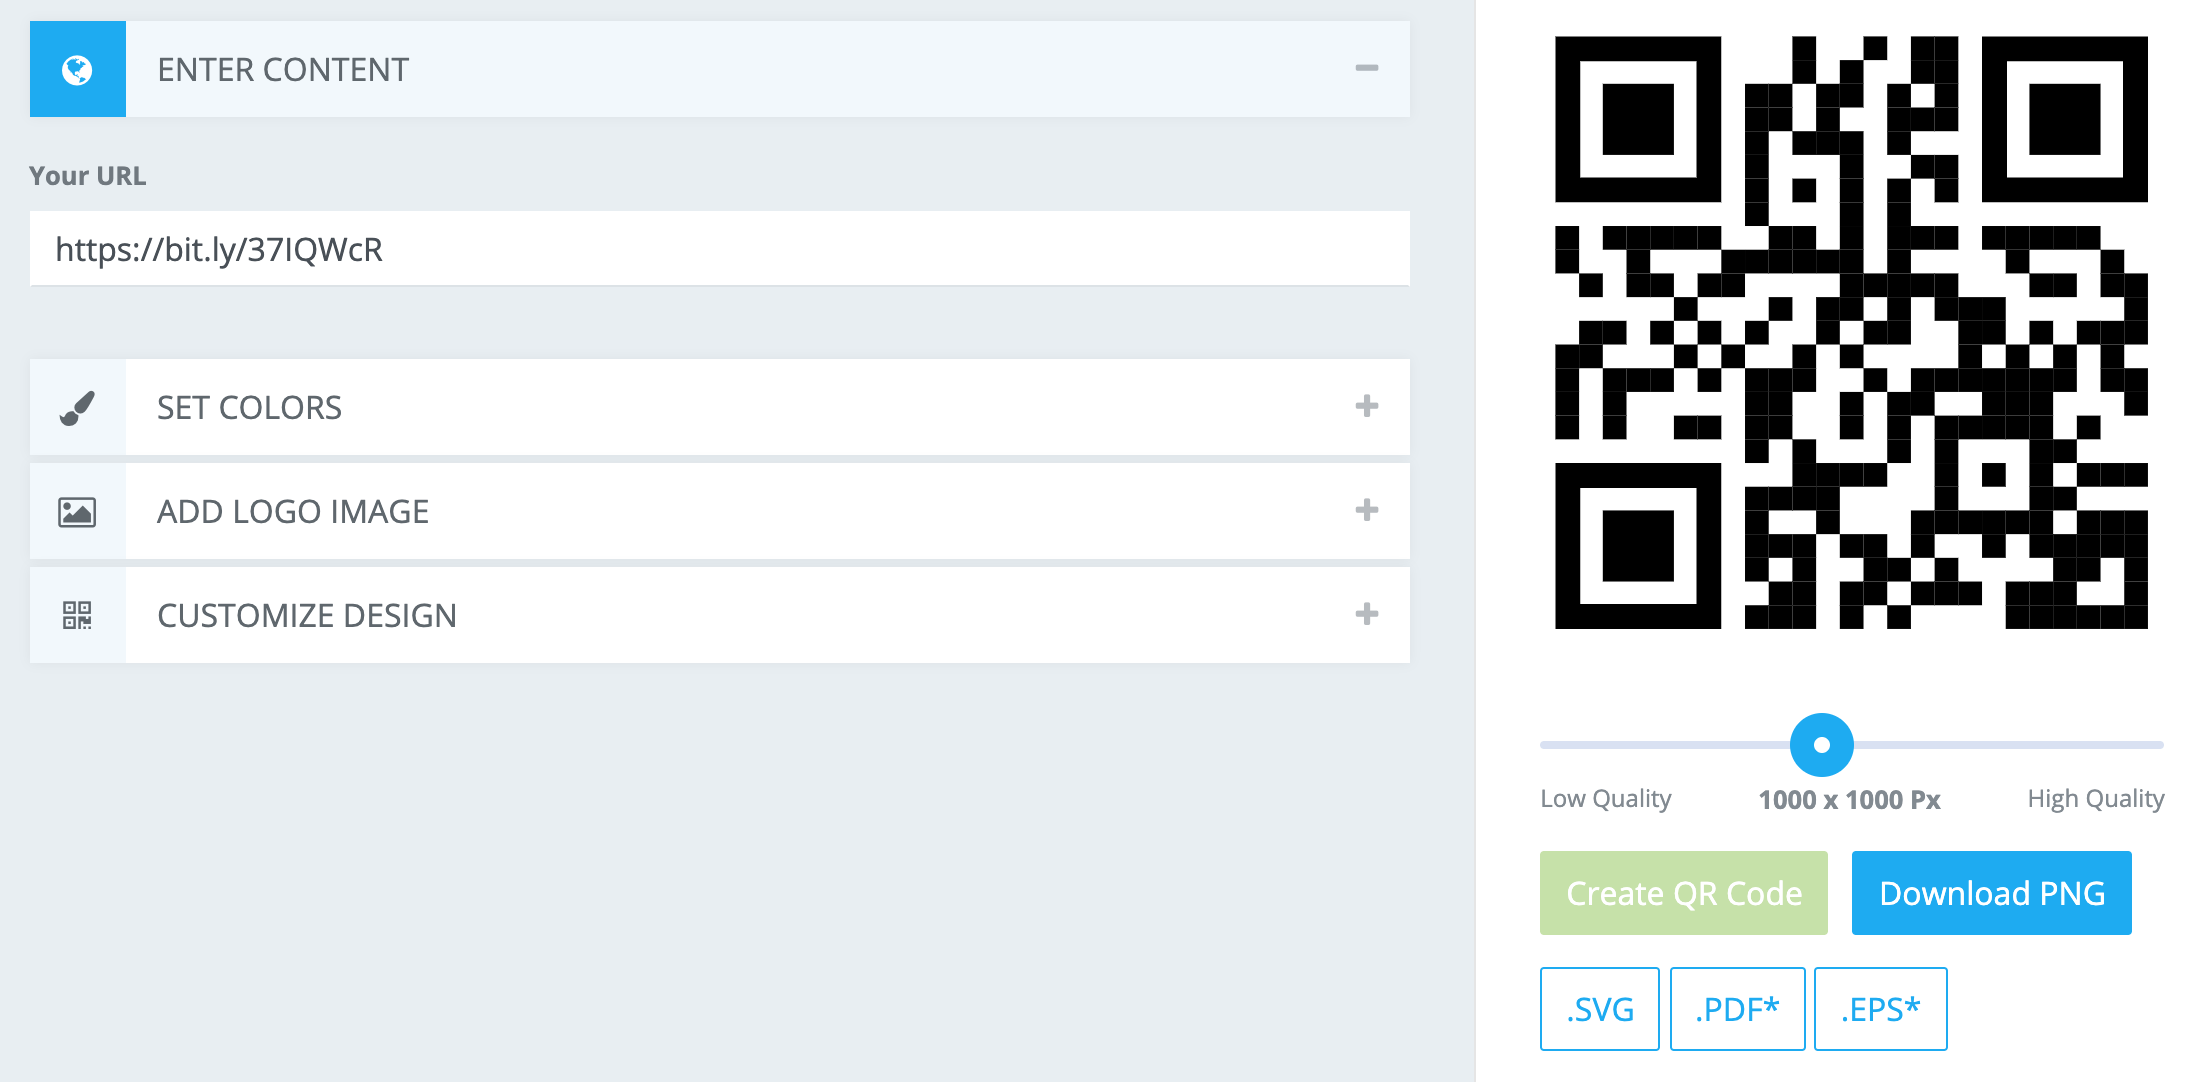 Turn your short URL into a QR code